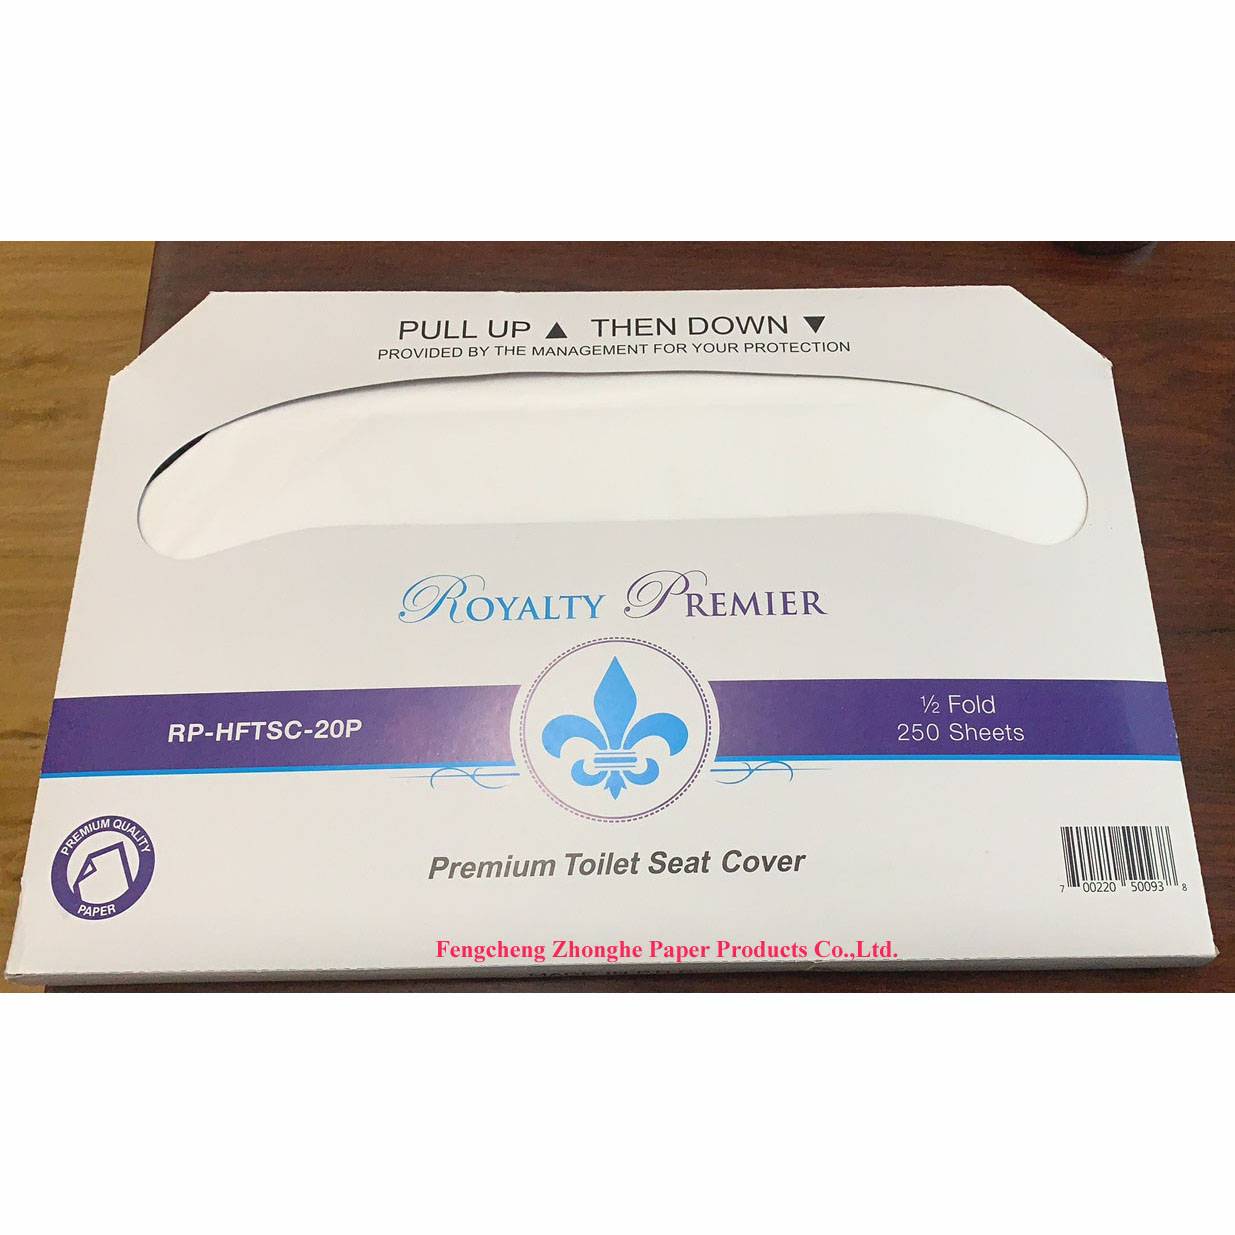 Hygienic safety toilet seat cover paper Featured Image